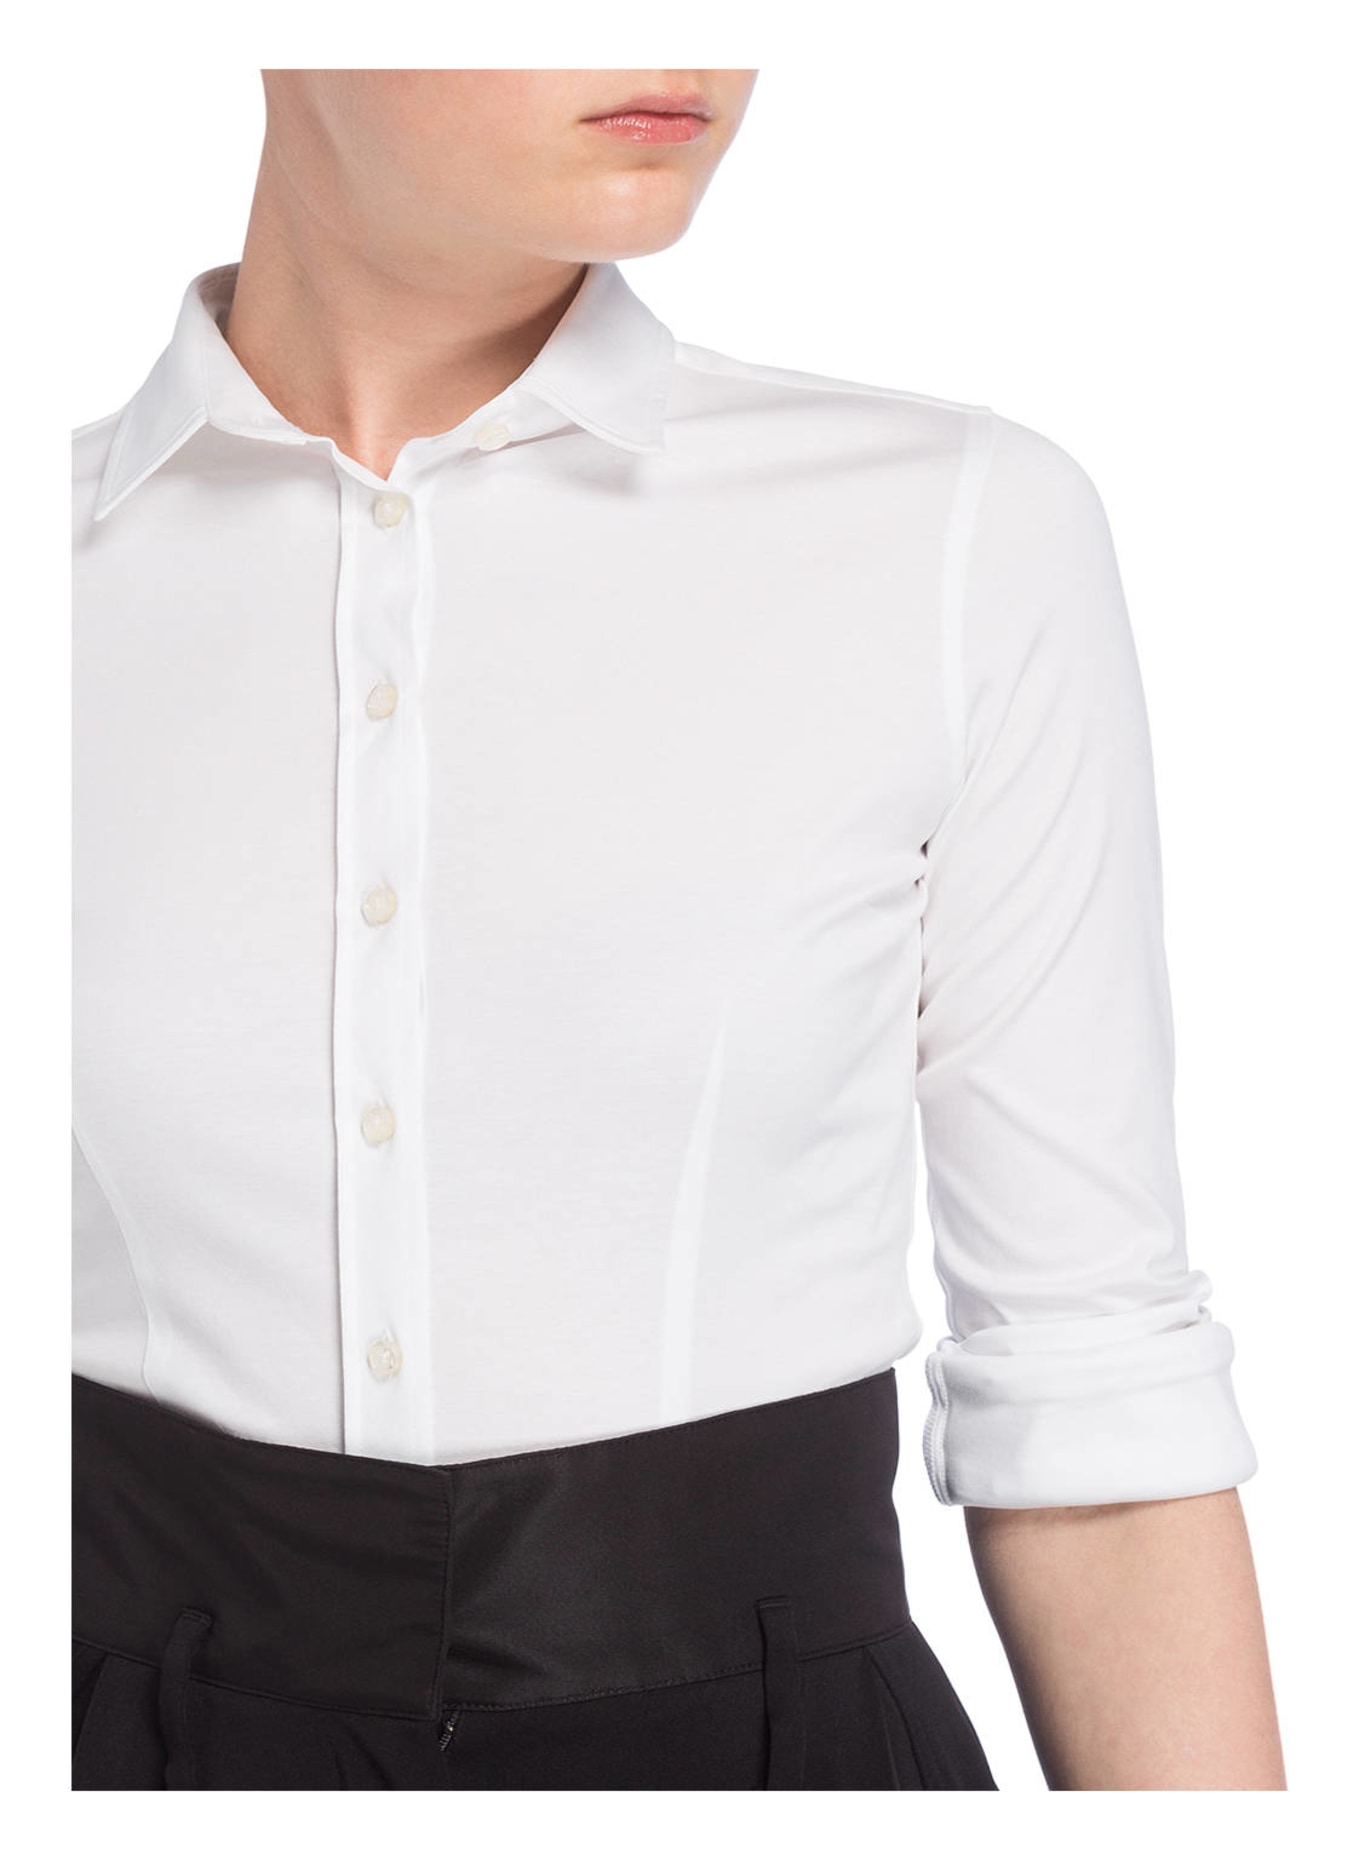 Soluzione Shirt blouse made of jersey, Color: 10 WEISS (Image 4)